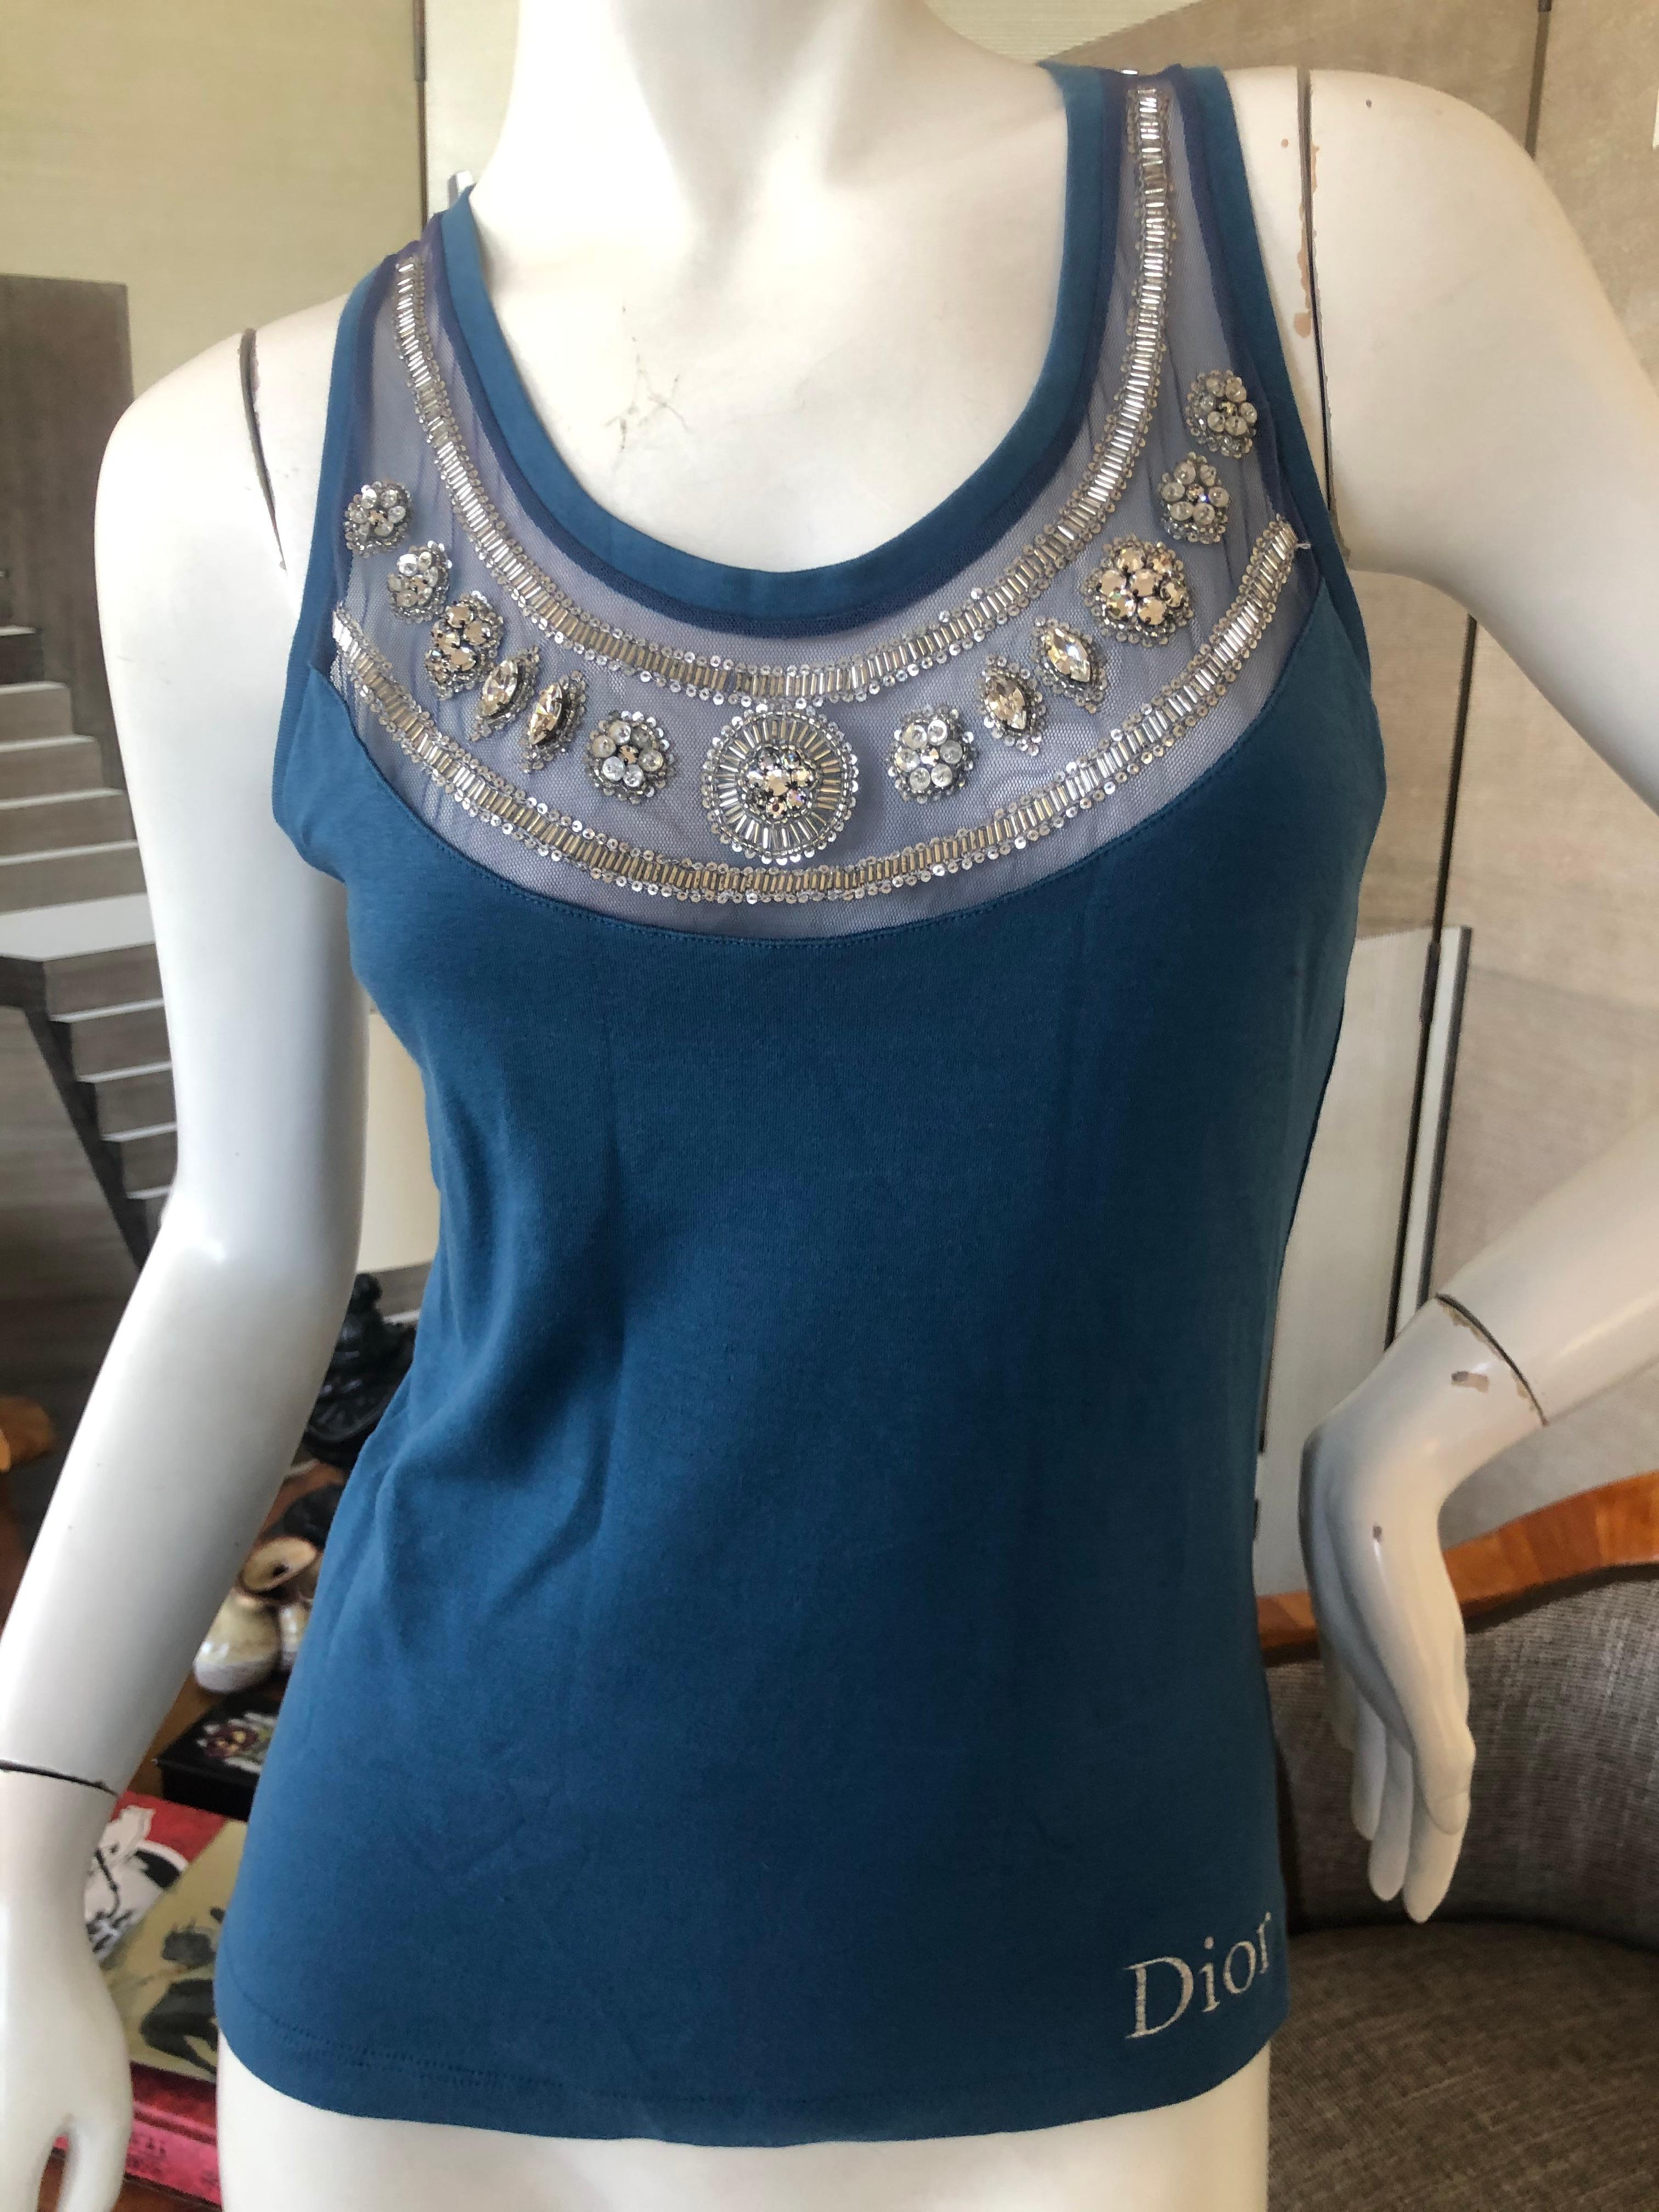 Blue Christian Dior Crystal Embellished Evening Top by John Galliano For Sale